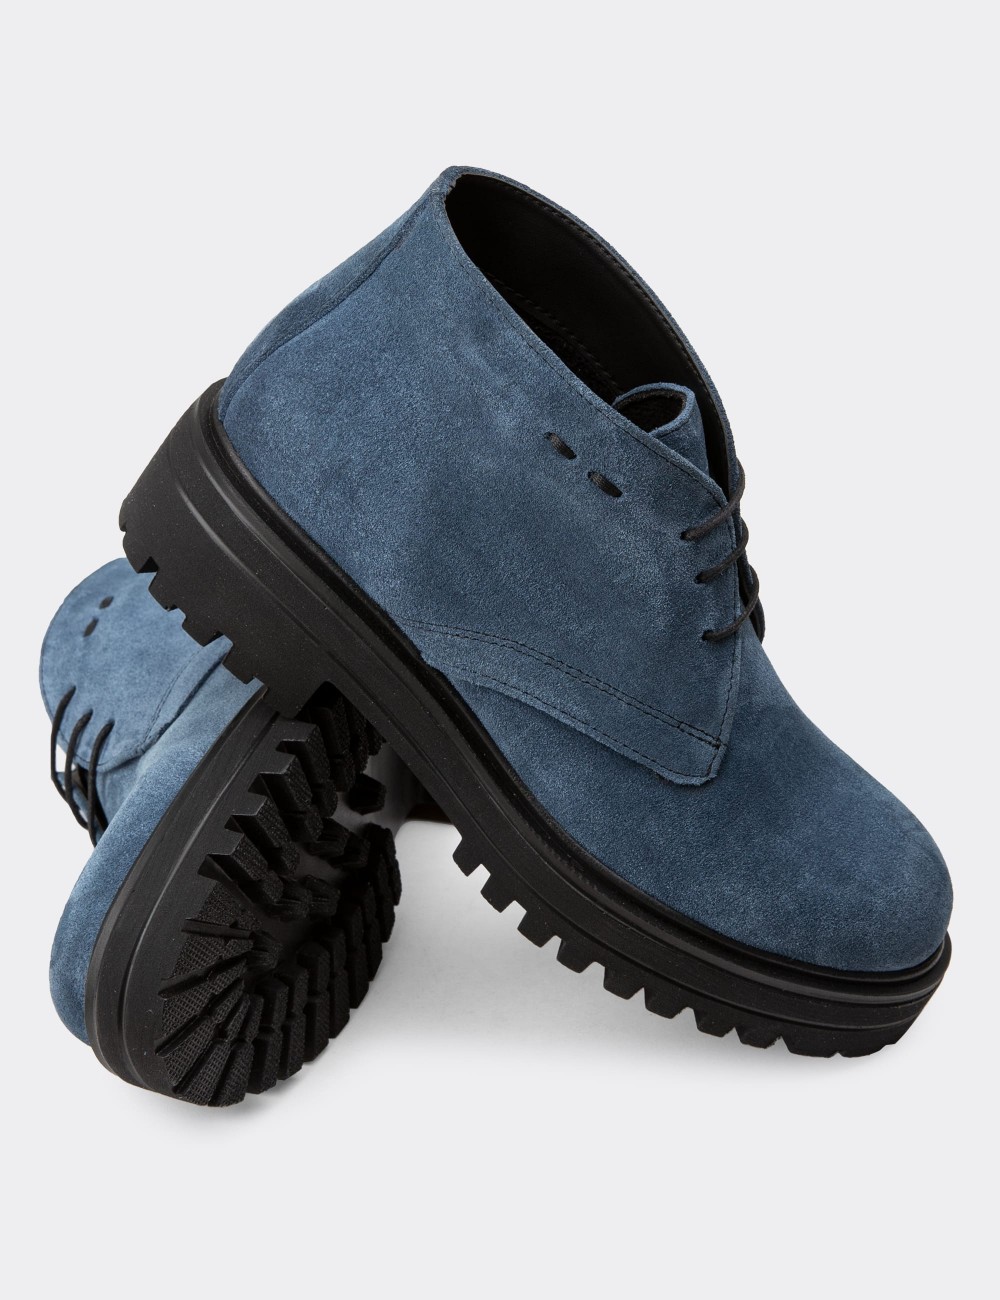 Blue Suede Leather Boots - 01847ZMVIE01